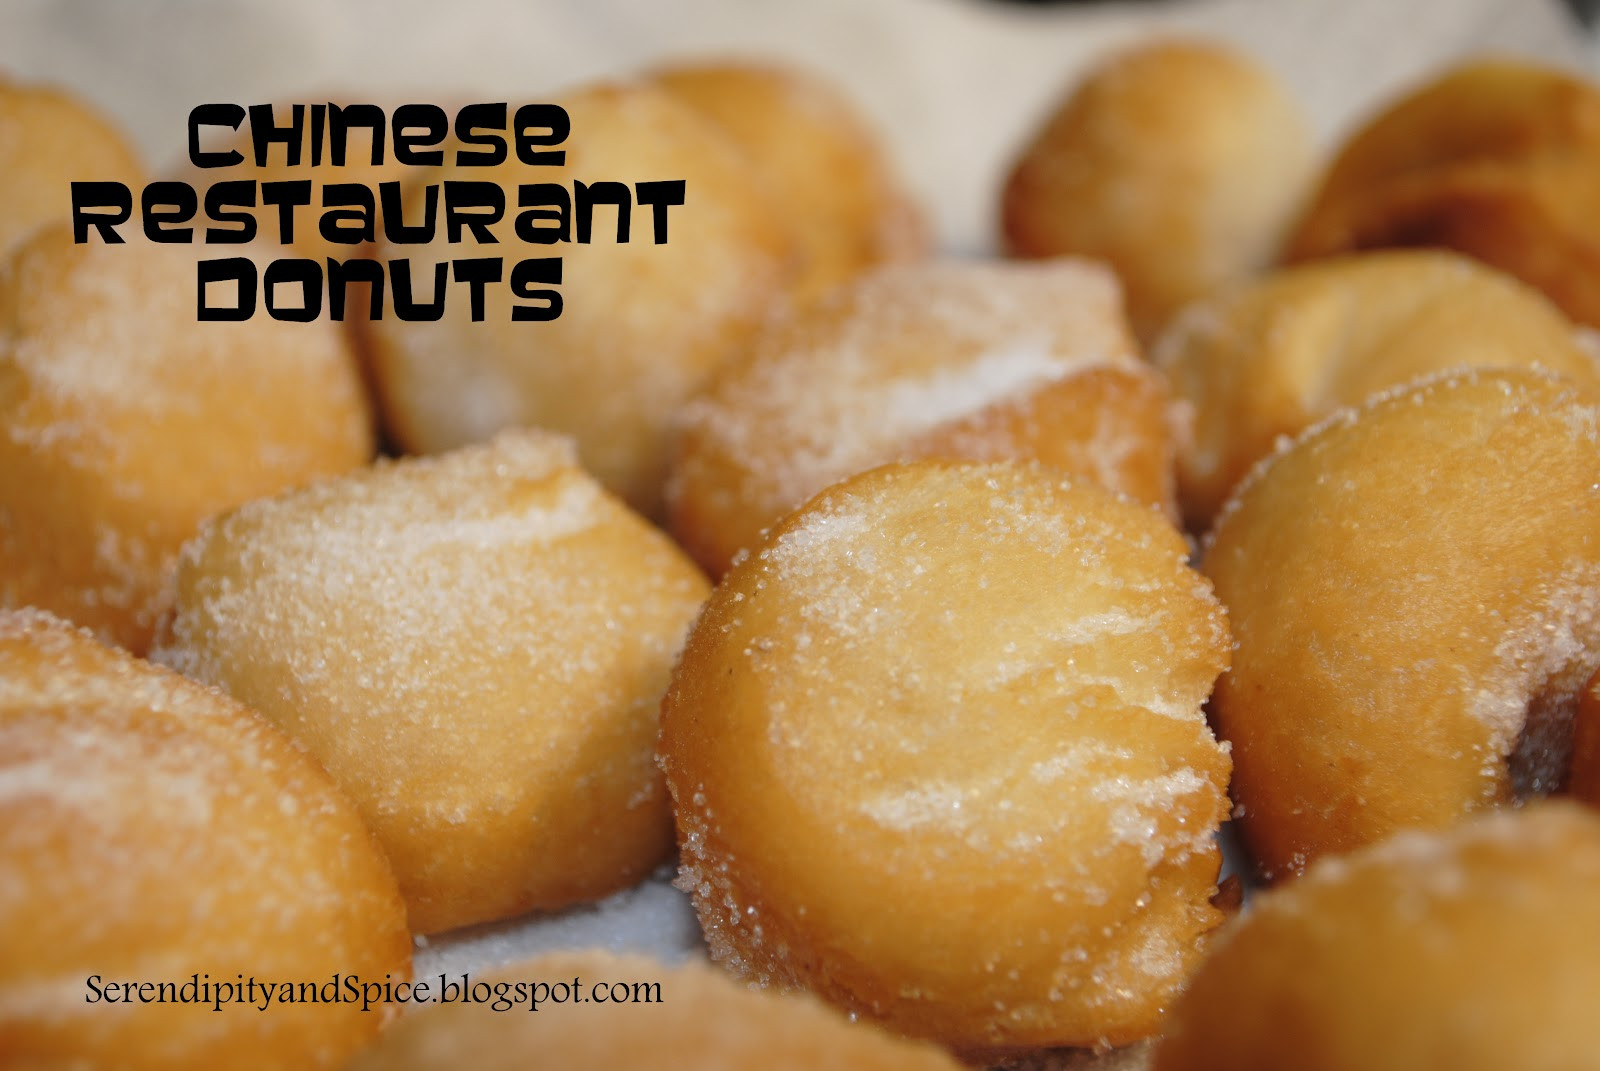 Chinese Doughnut Recipes
 How to Make Donuts Like a Chinese Restaurant